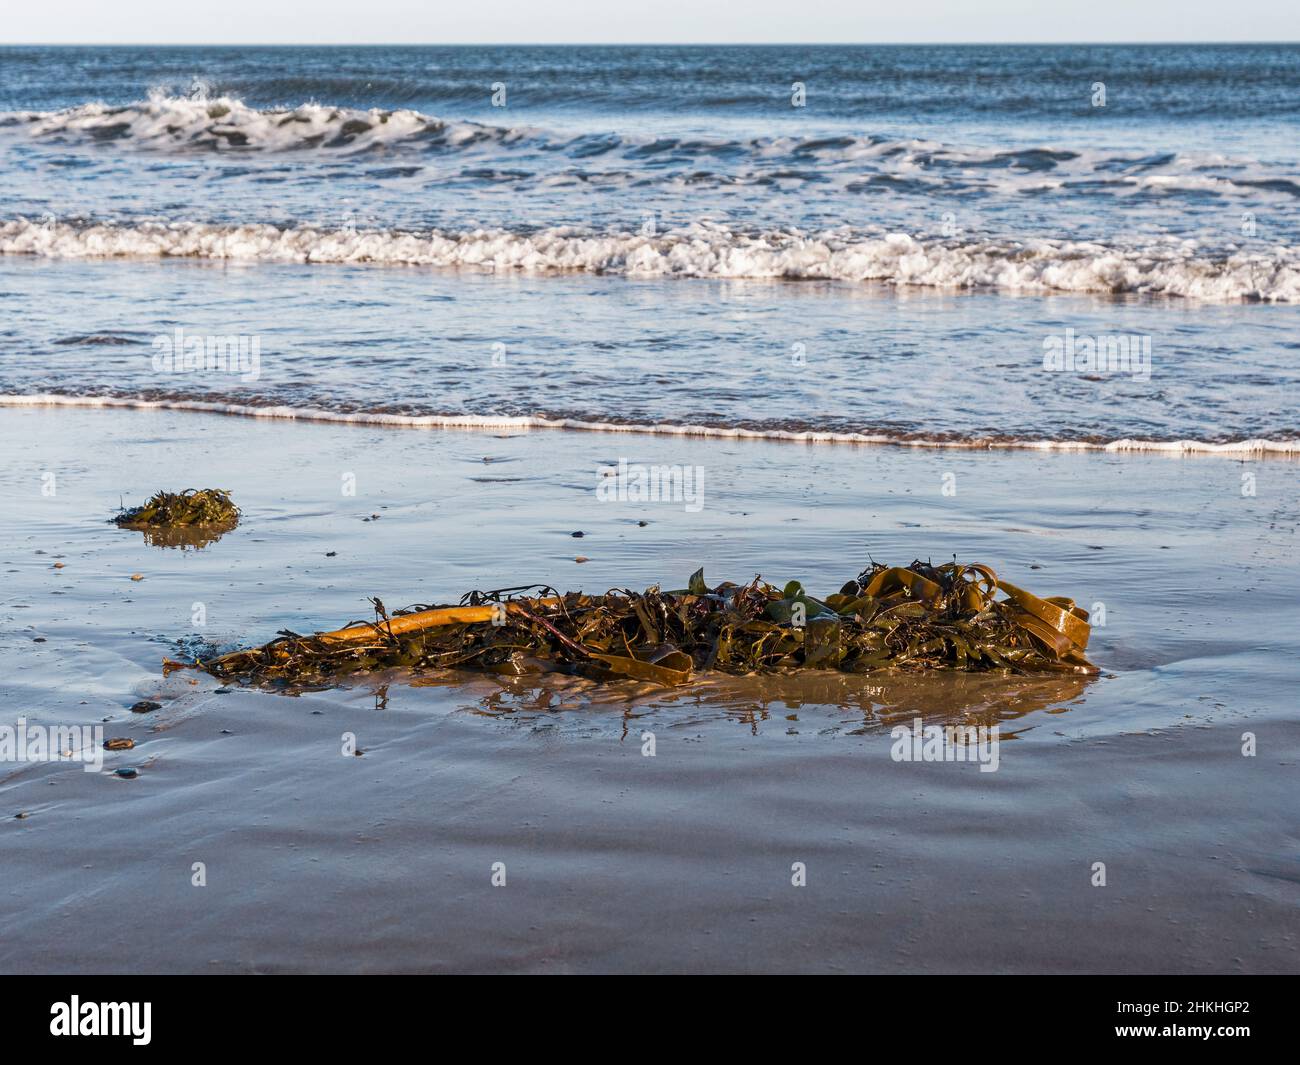 Laminaria digitata or Oarweed washed up on Cambois beach in Northumberland, UK. Stock Photo